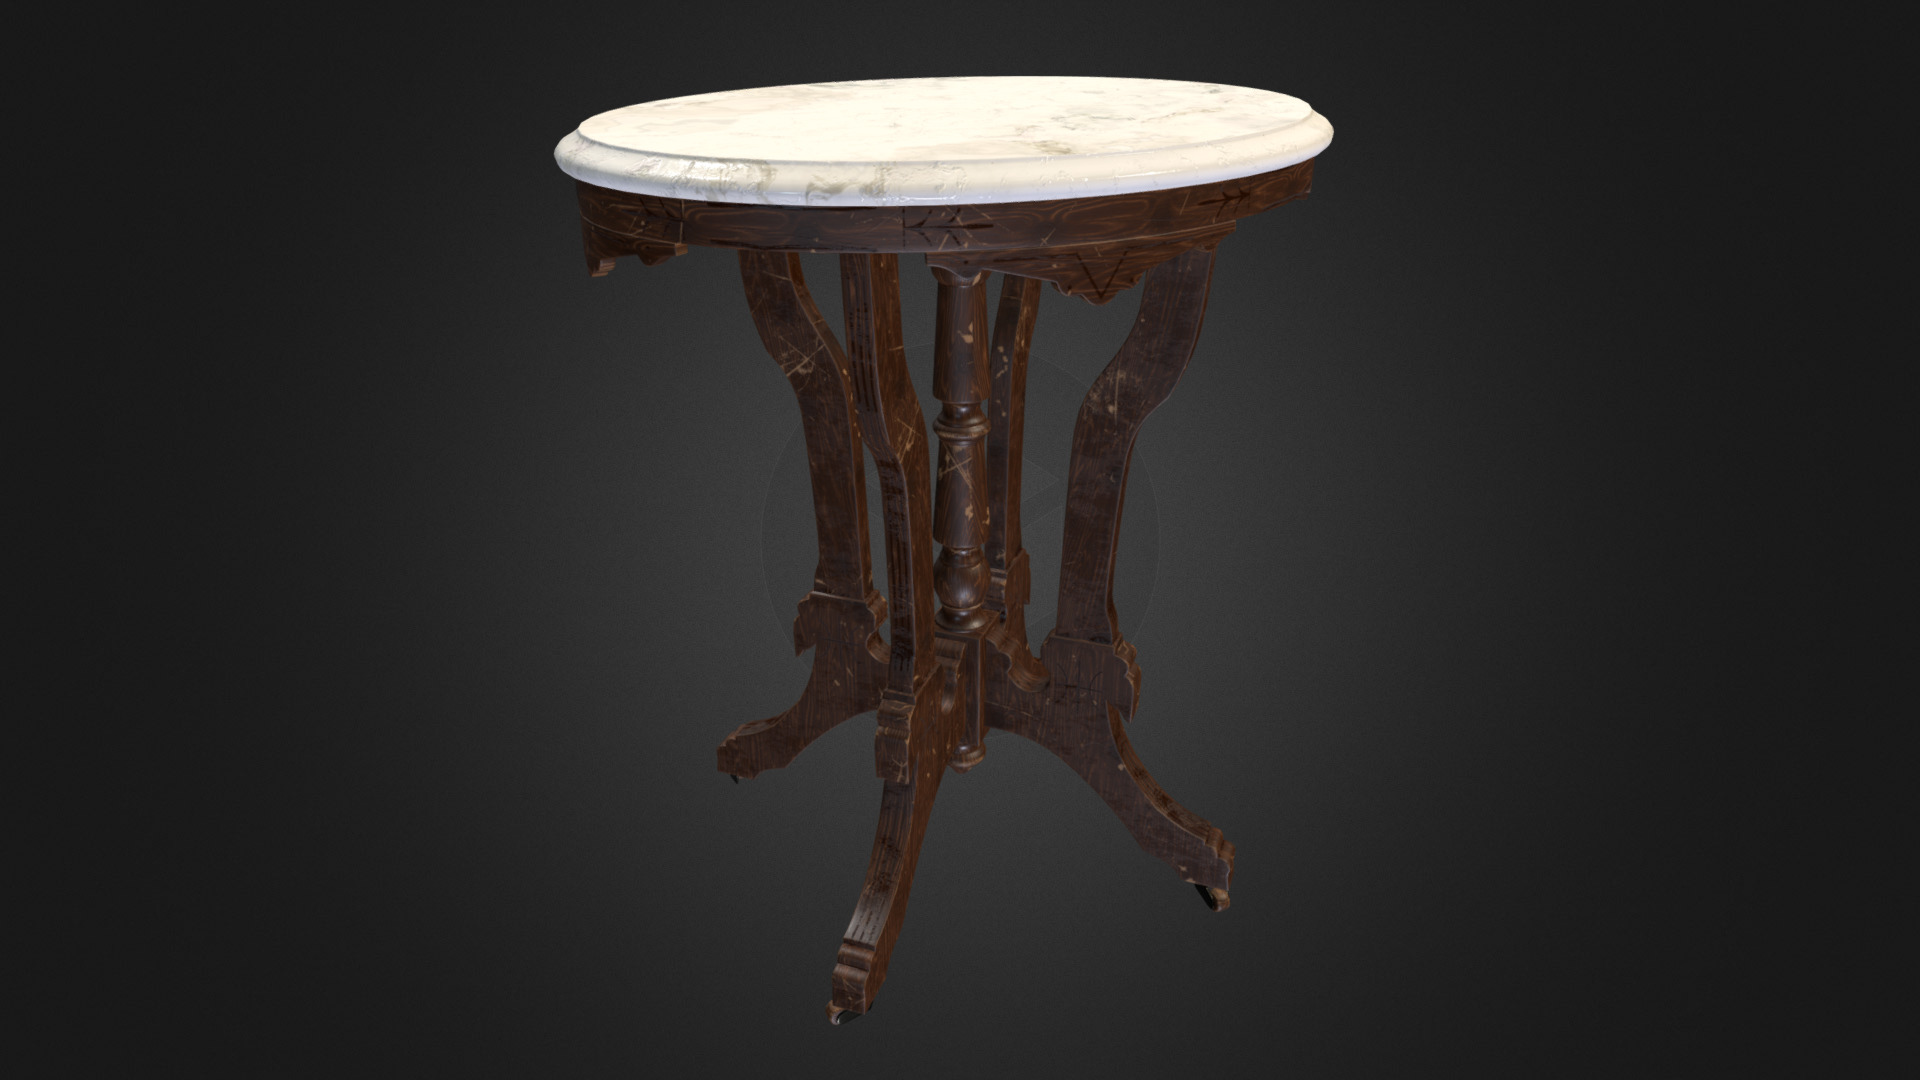 3D model Pedestal Table 003 (High Poly) V1 - This is a 3D model of the Pedestal Table 003 (High Poly) V1. The 3D model is about a table with a stool with Space Needle in the background.